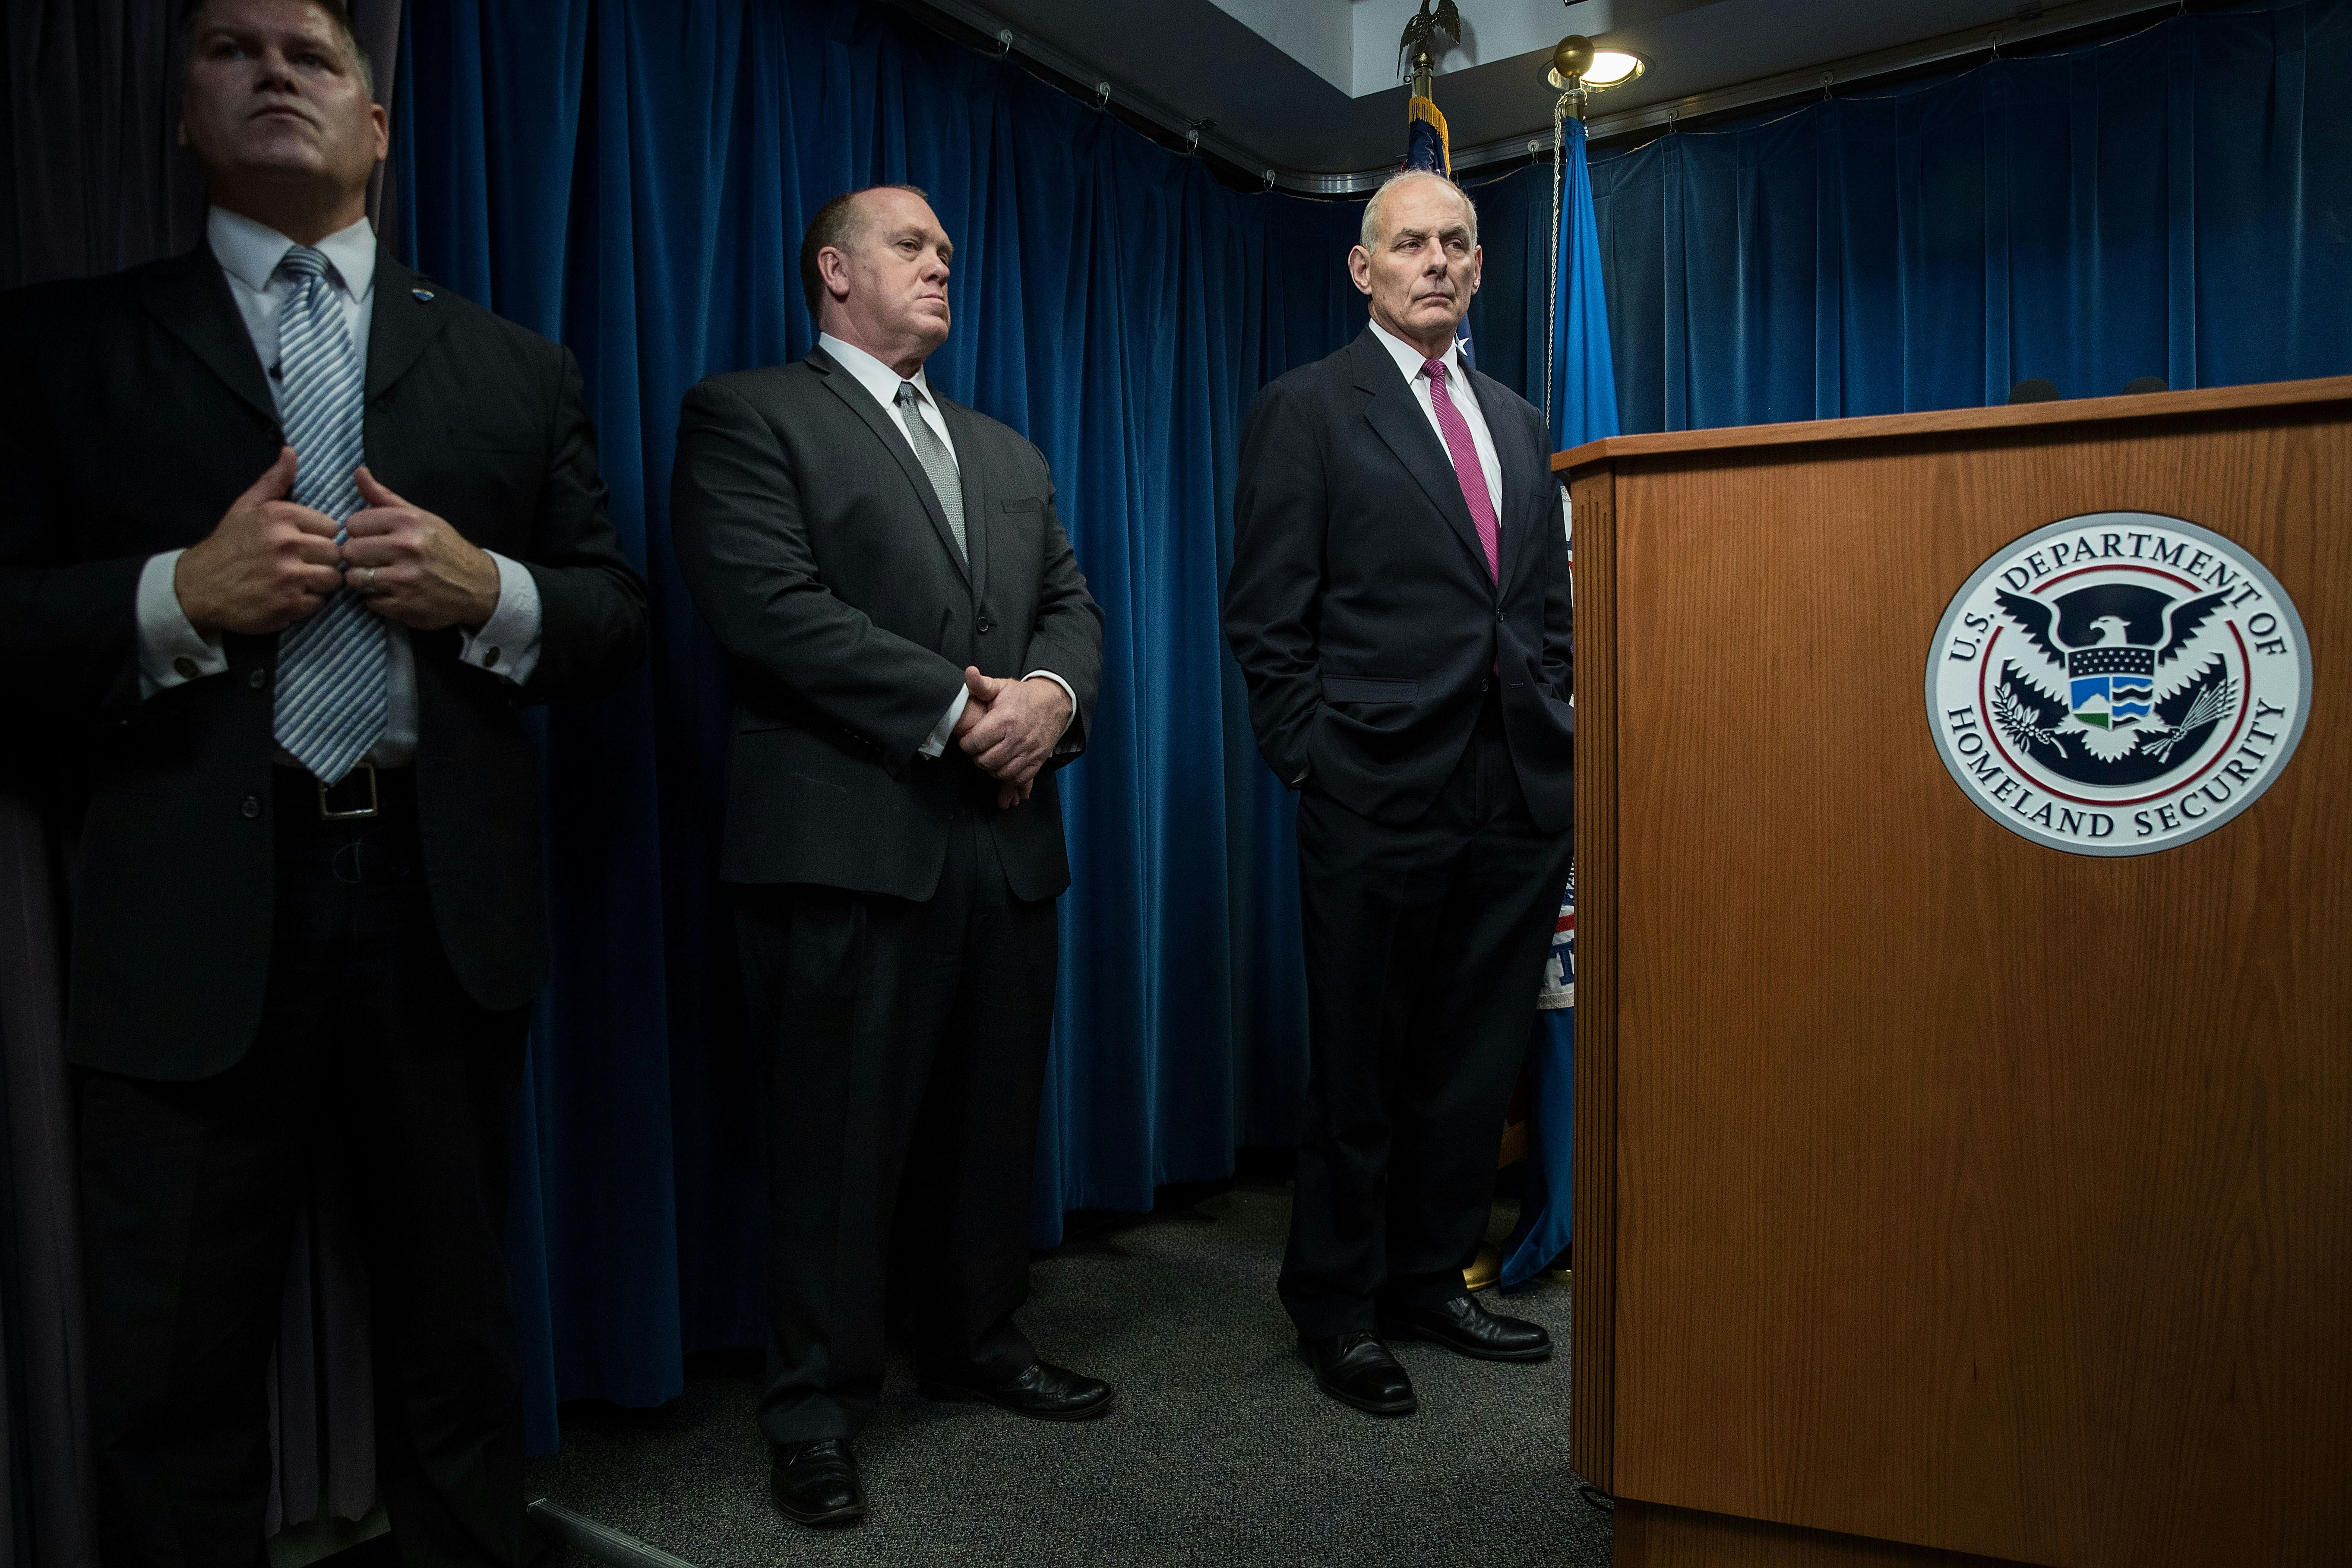 WASHINGTON, DC - JANUARY 31: (L to R) U.S. Immigration and Customs Enforcement (ICE) Acting Director Thomas Homan and Secretary of Homeland Security John Kelly listen to questions during a press conference related to President Donald Trump's recent executive order concerning travel and refugees, January 31, 2017 in Washington, DC. On Monday night, President Donald Trump fired the acting Attorney General Sally Yates after she released a statement saying the Justice Department would not enforce the president's executive order that places a temporary ban on citizens from seven Muslim-majority countries. (Photo by Drew Angerer/Getty Images)